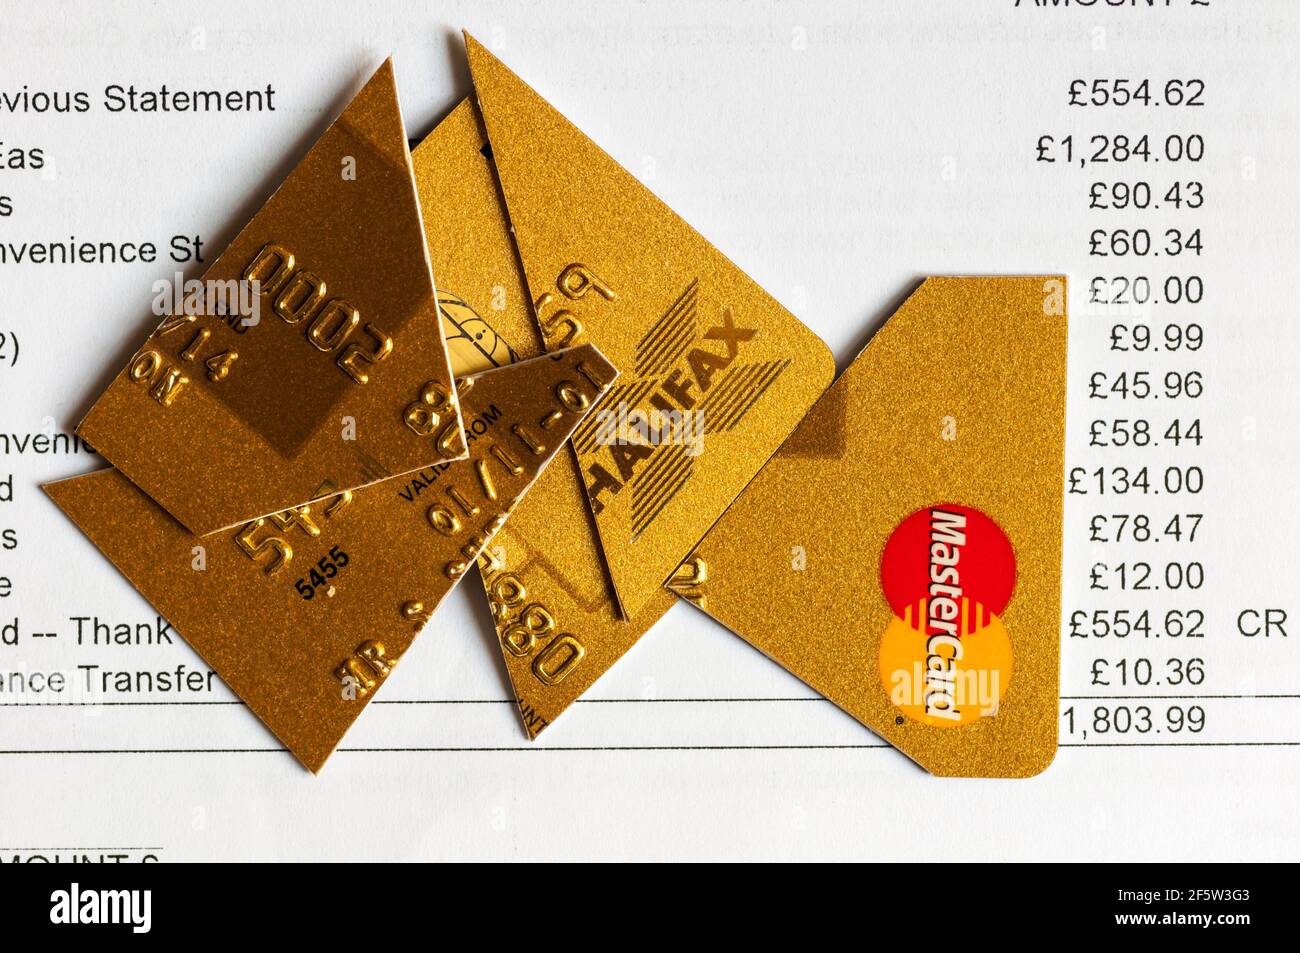 Credit card statement with cut up card, either to avoid debt or prevent identity theft. Stock Photo